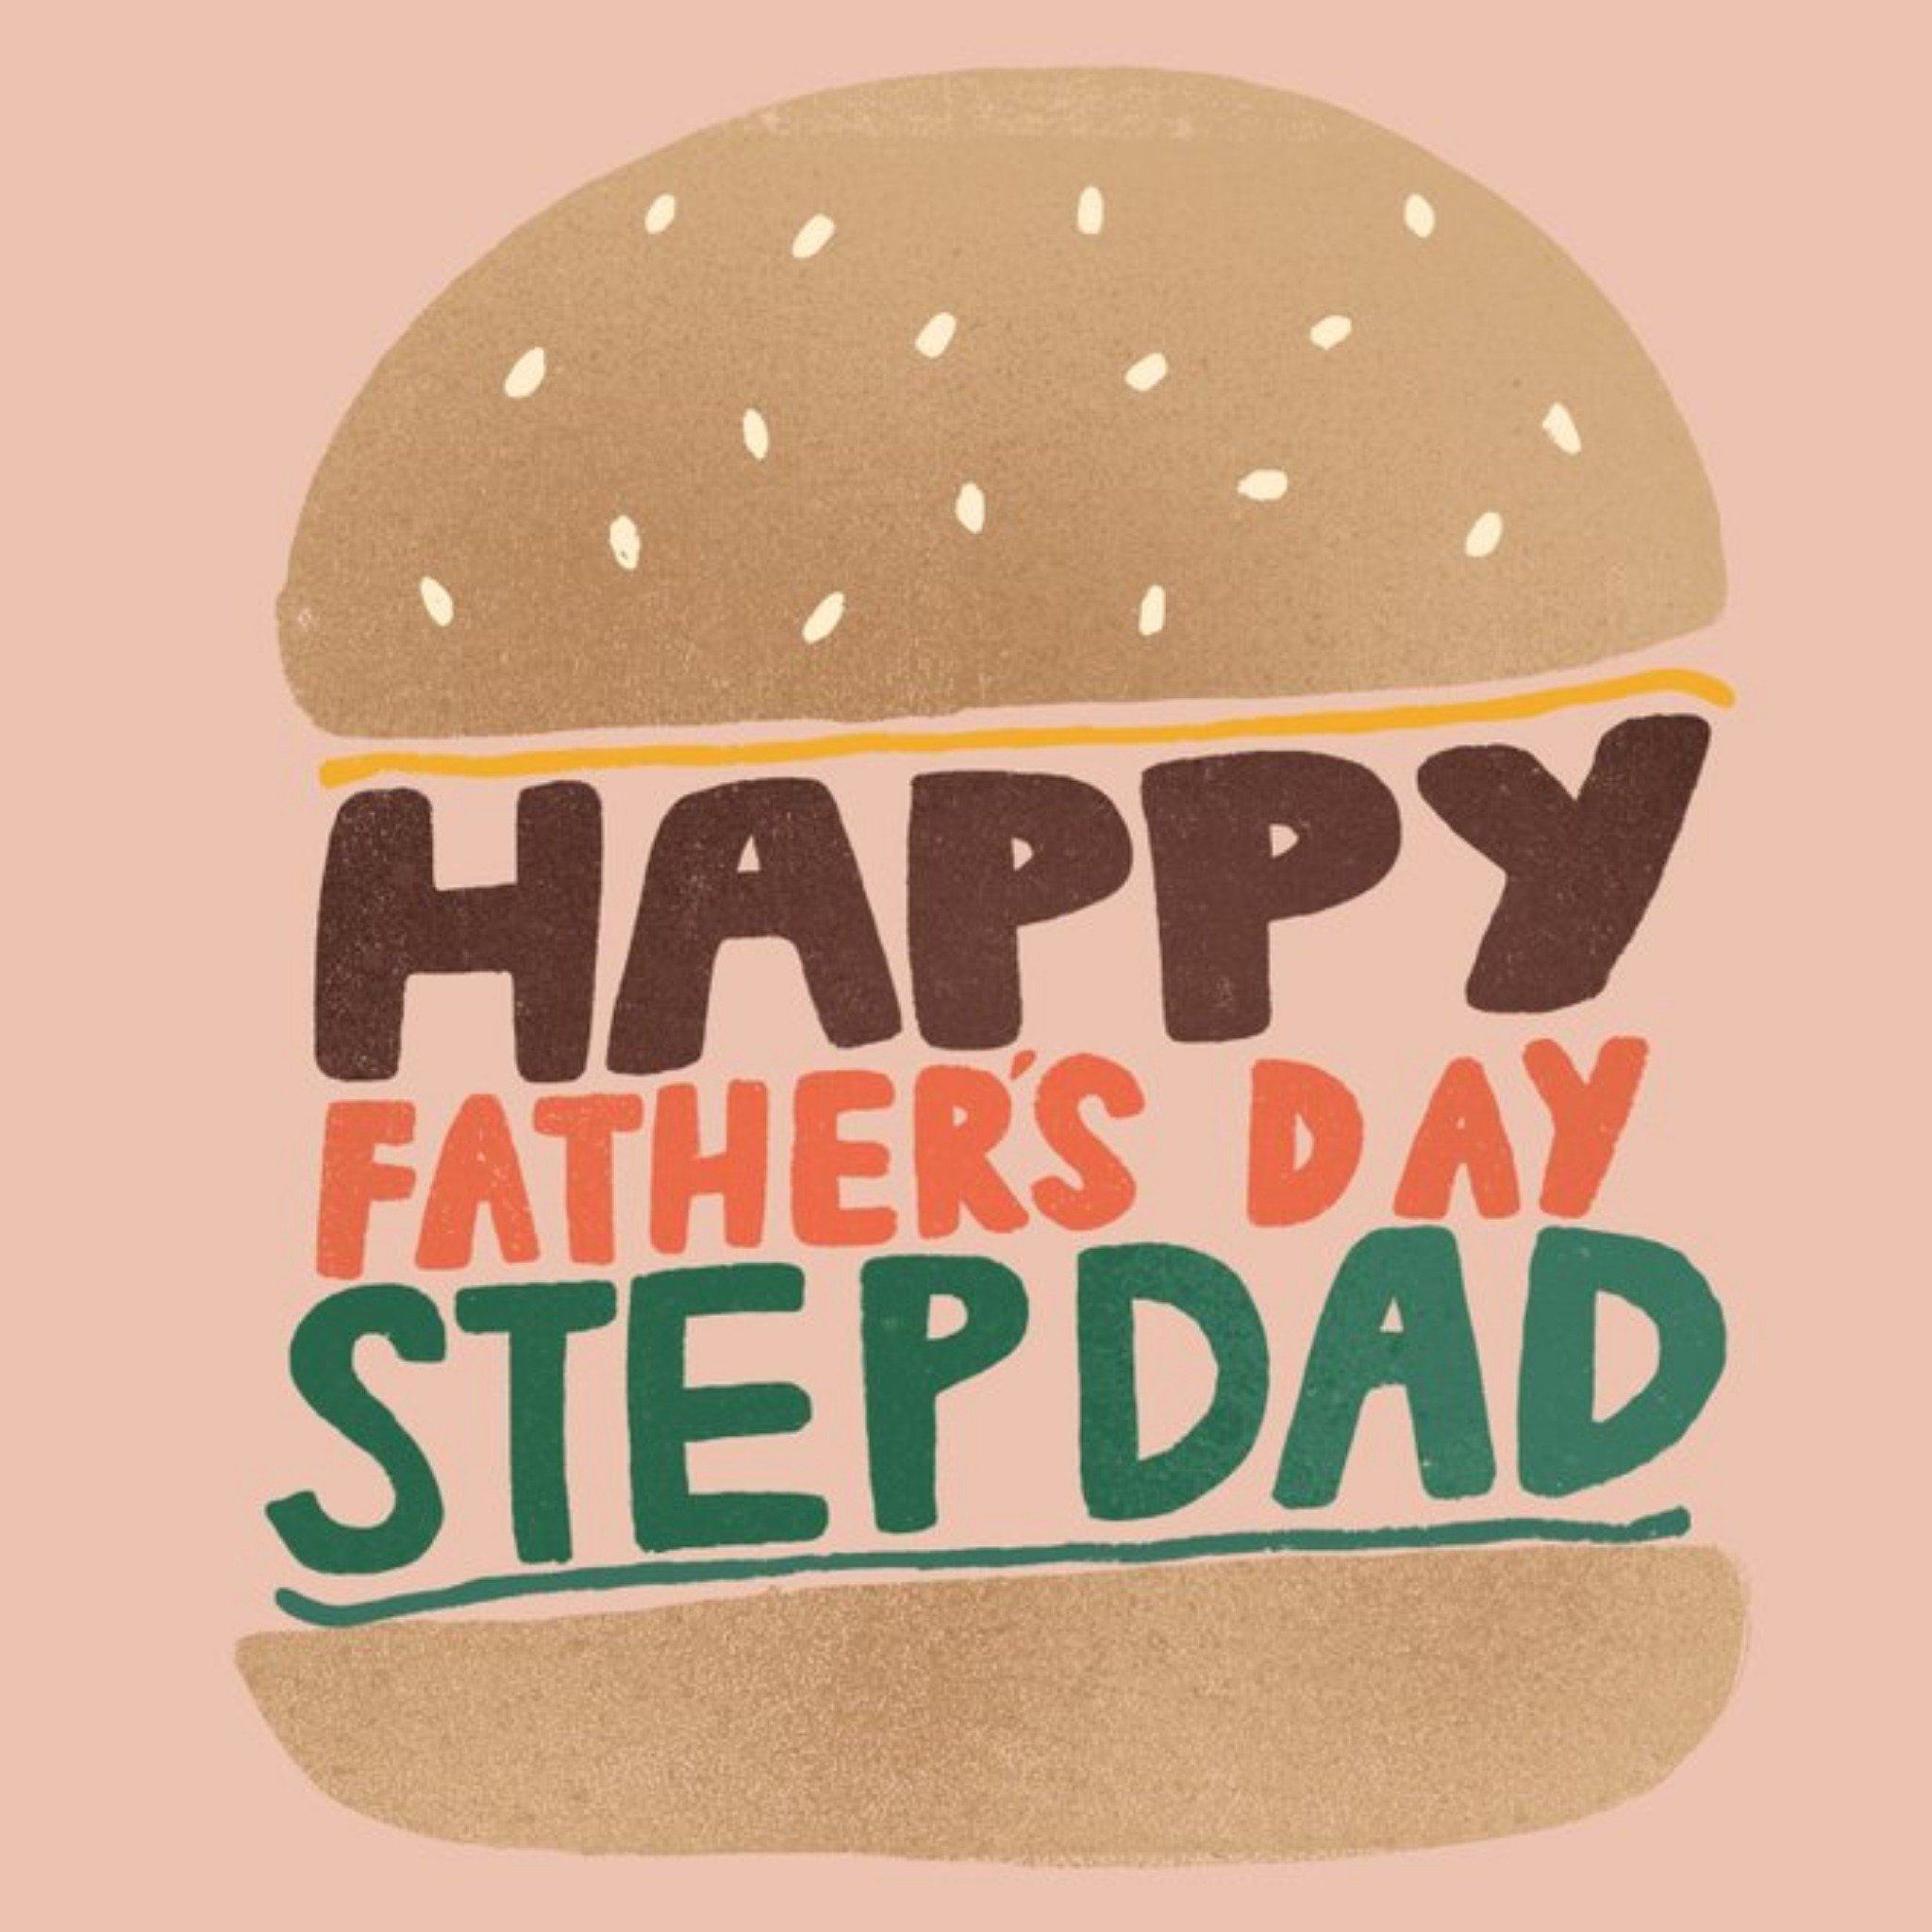 Moonpig Illustrated Burger Typographic Step Dad Father's Day Card, Square